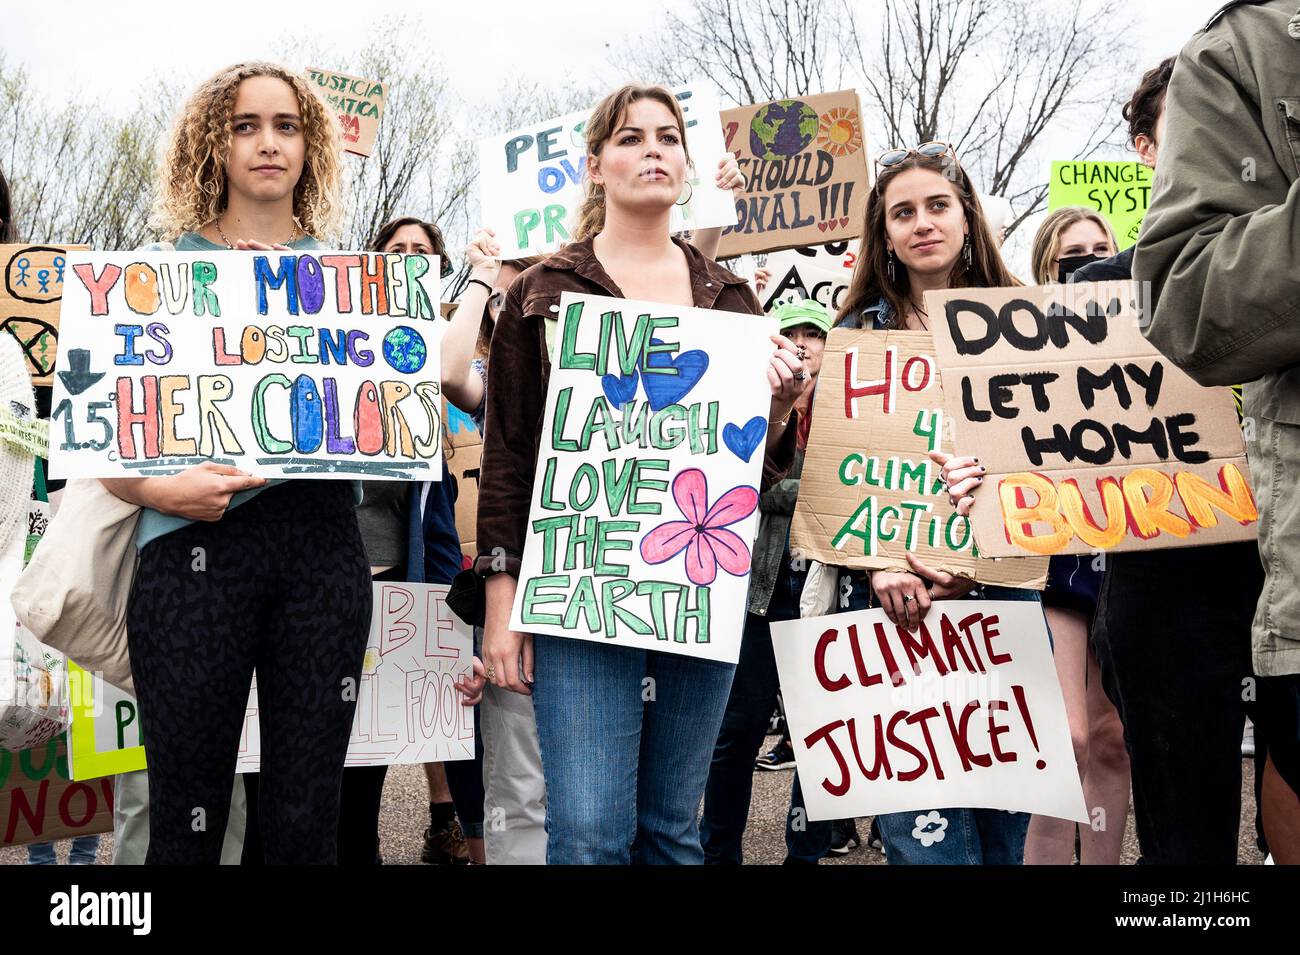 Washington, United States. 25th Mar, 2022. March 25, 2022 - Washington, DC, United States: Women holding signs saying 'Your mother is losing her colors', 'Live laugh love the earth' and 'Don't burn my home' at a Global Climate Strike demonstration. (Photo by Michael Brochstein/Sipa USA) Credit: Sipa USA/Alamy Live News Stock Photo